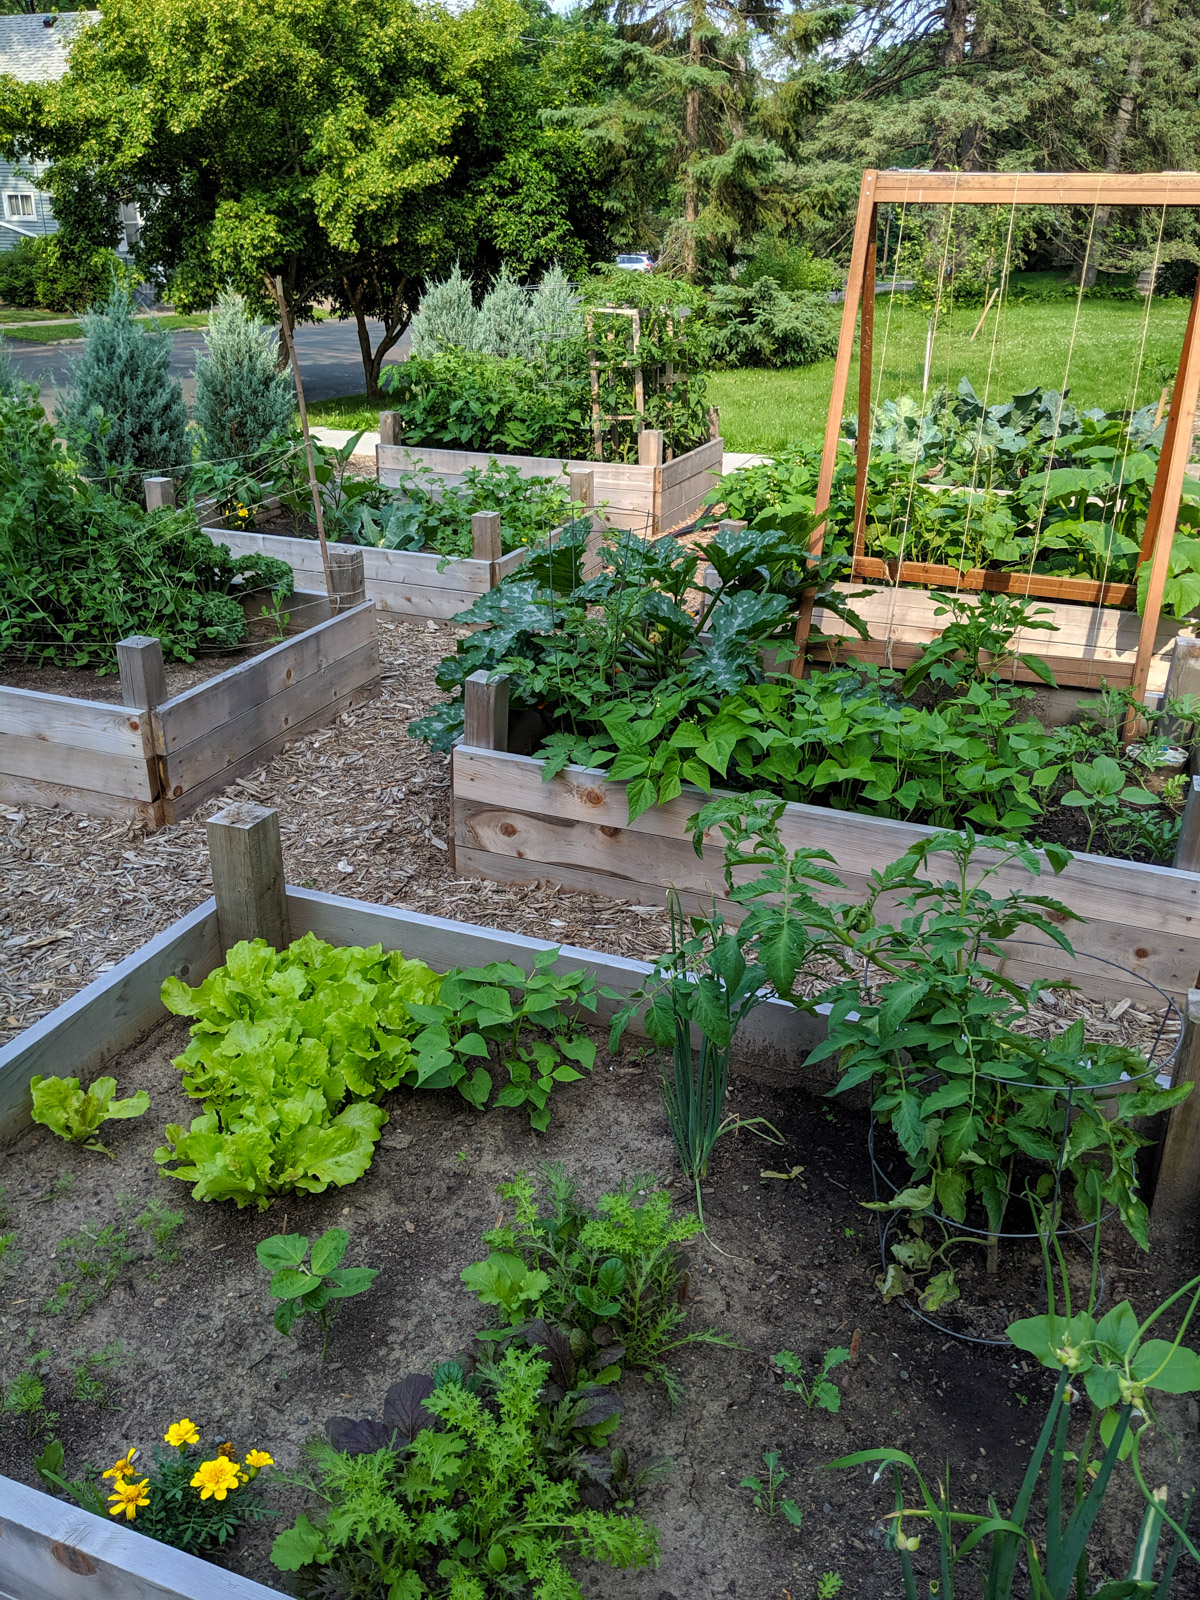 Raised bed vegetable gardens with plants growing in July.